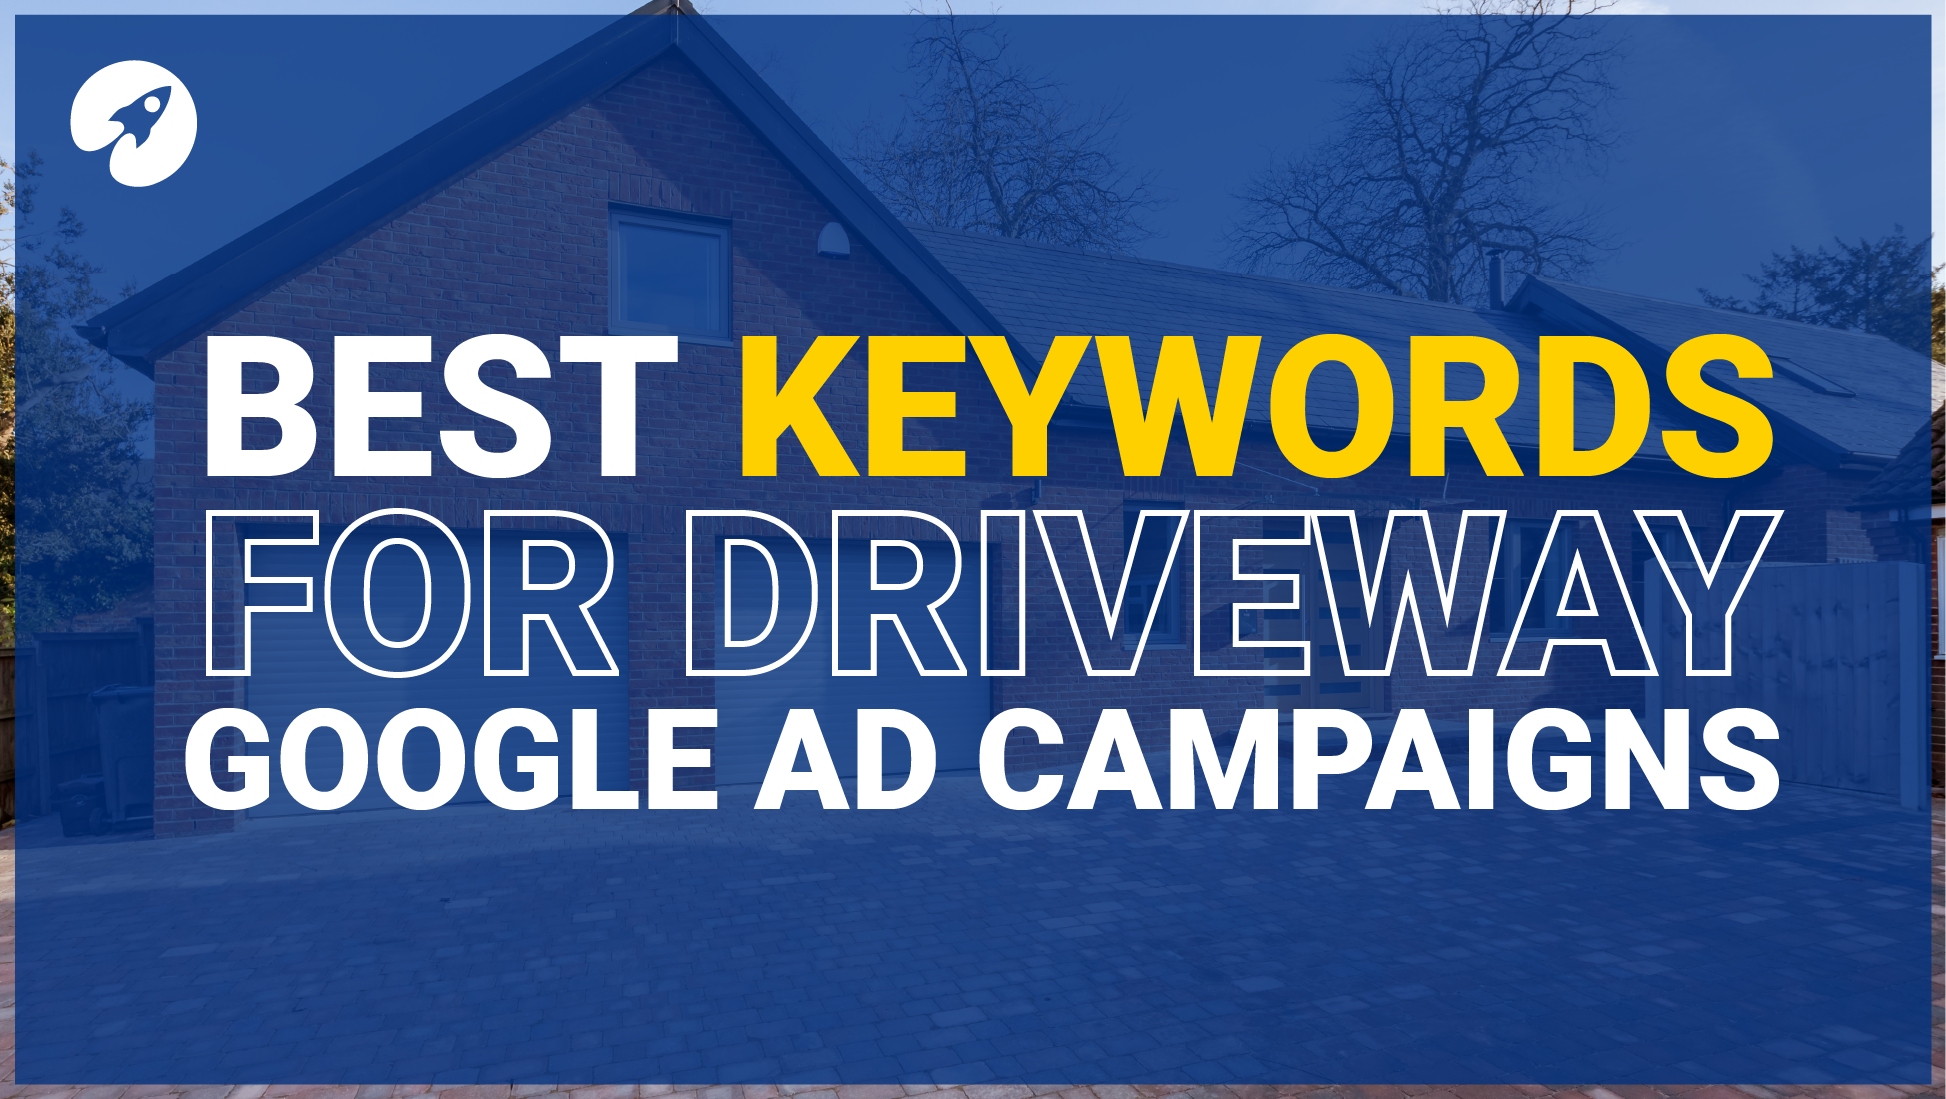 Best keywords for a driveway Google Ad campaign